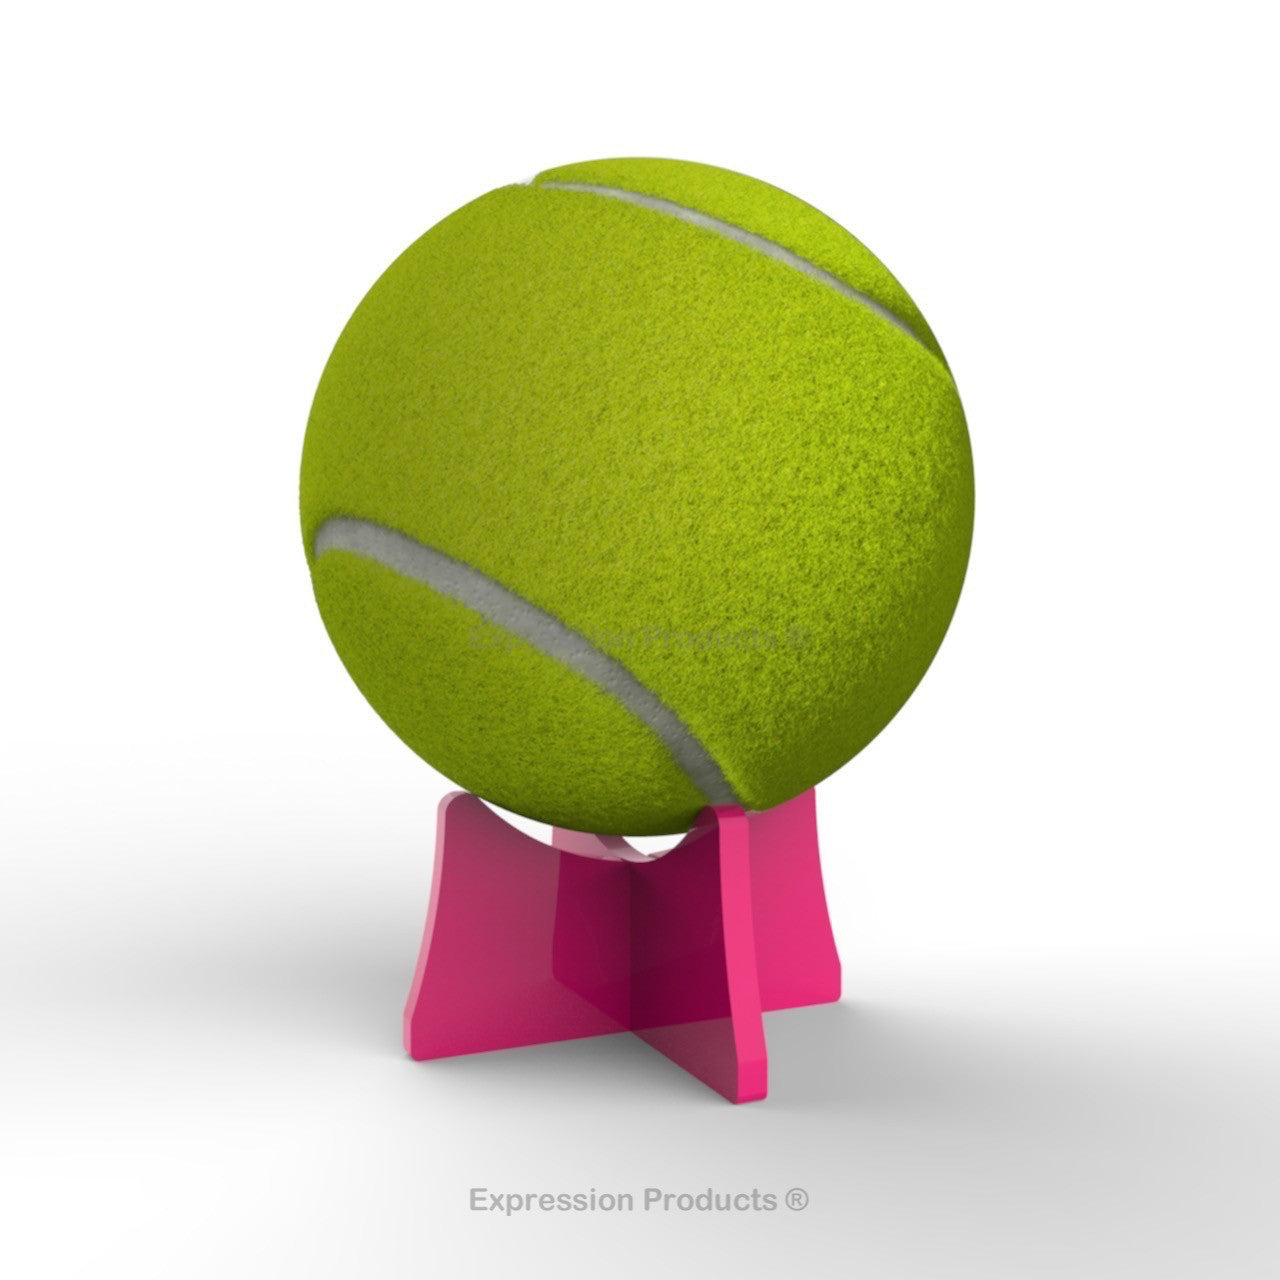 Tennis Ball Display Stand - Expression Products Ltd